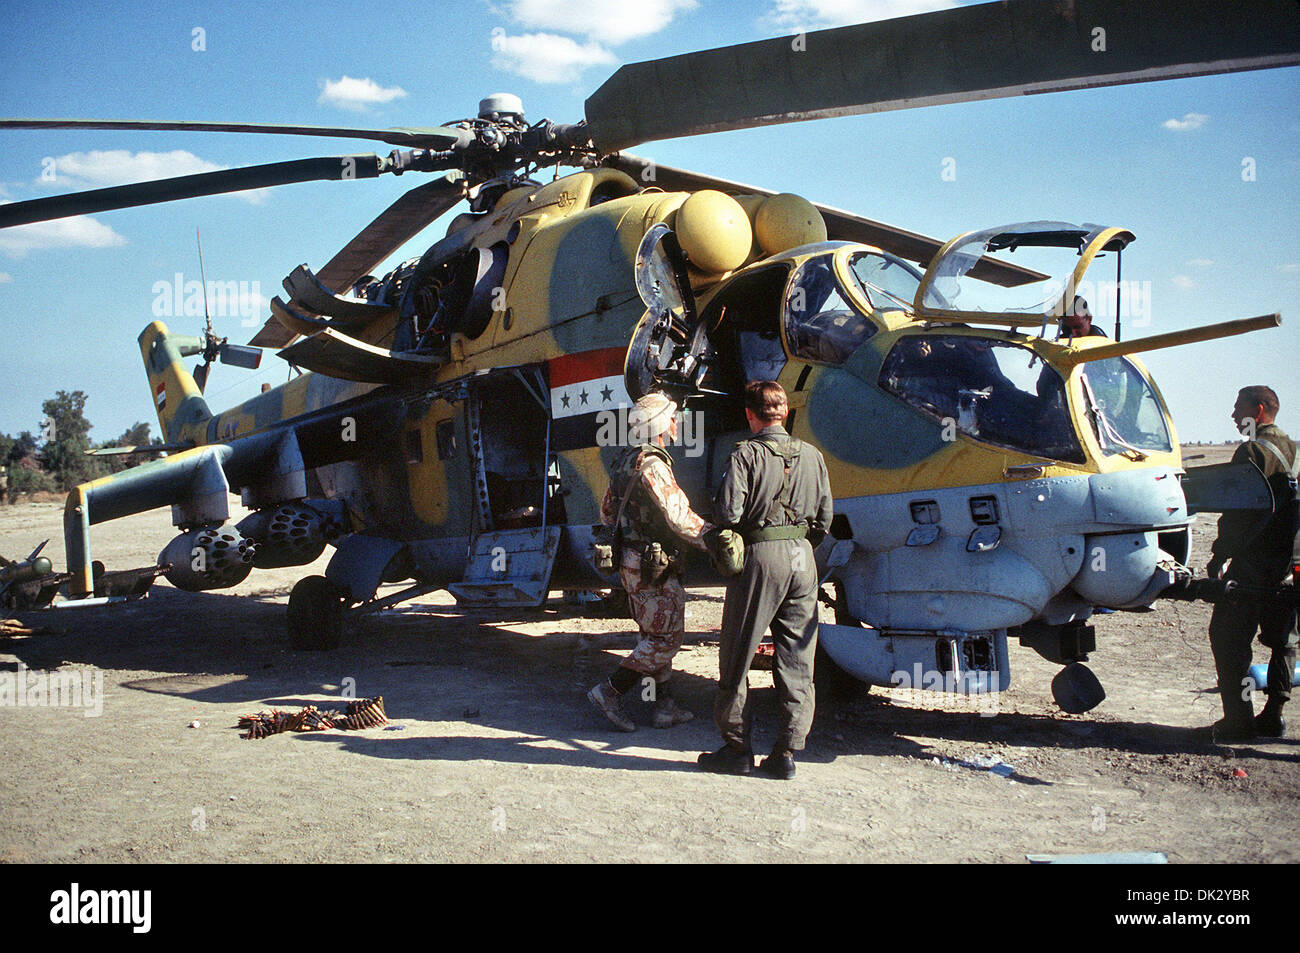 US soldiers with the 82nd Airborne Division inspect an Iraqi MIL Mi-24 Hind-D assault helicopter abandoned during Operation Desert Storm March 4, 1991 in Kuwait. Stock Photo